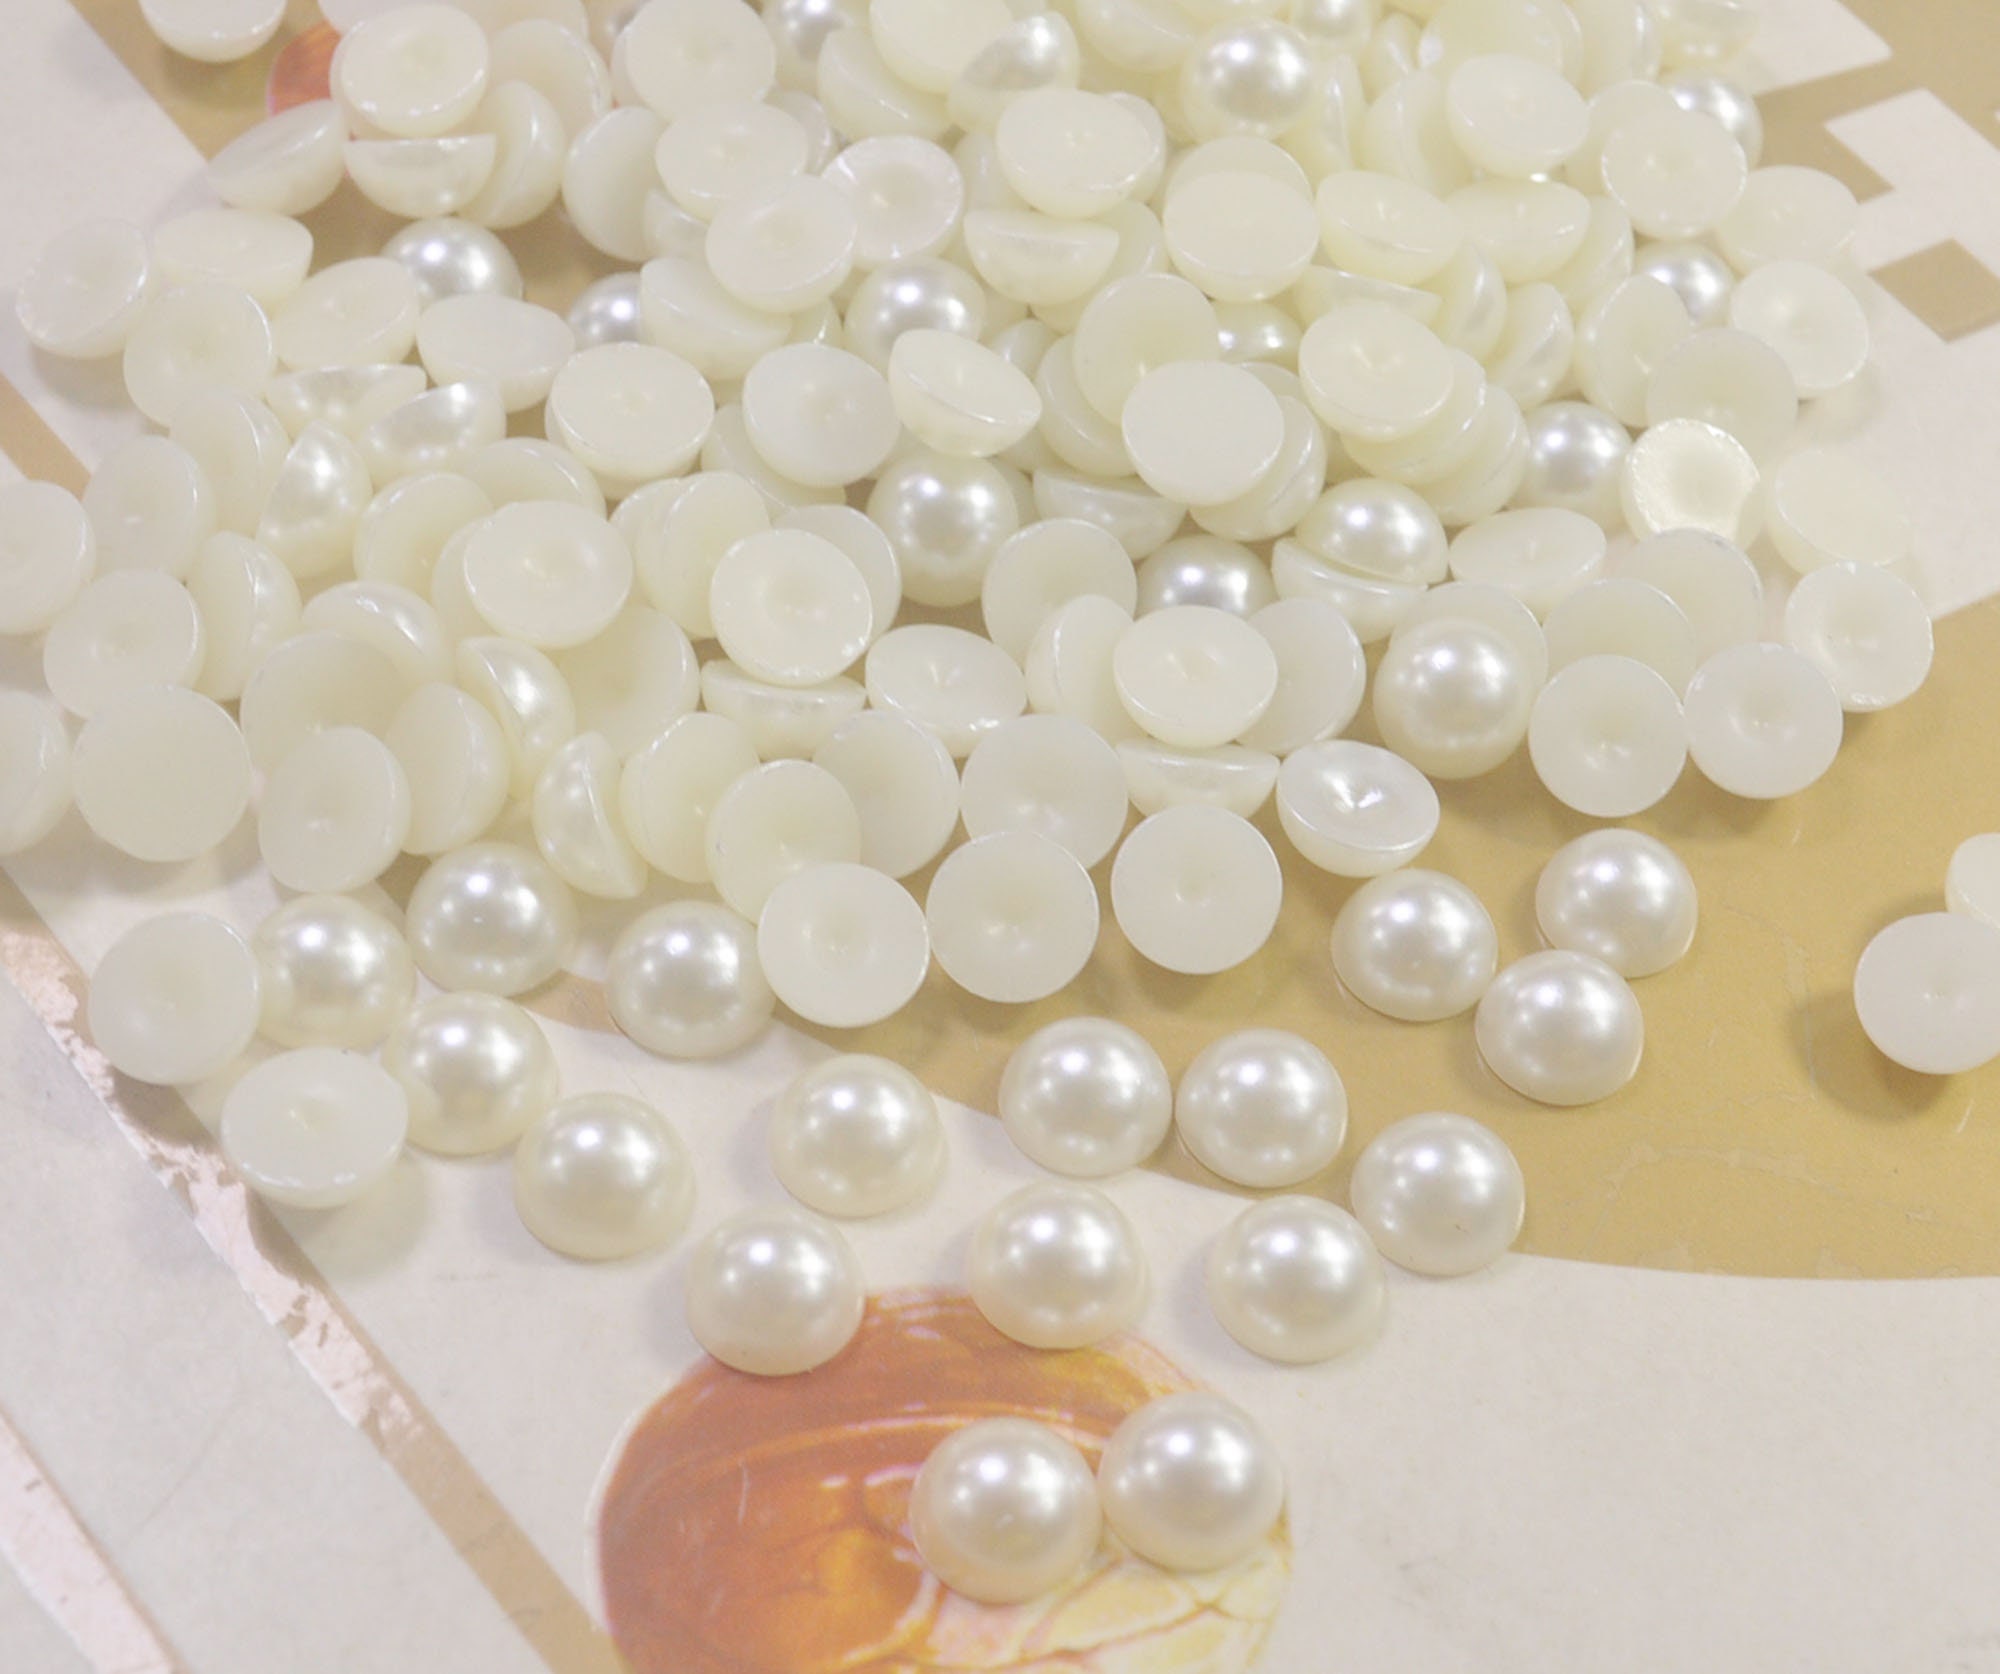 2800pcs Half Pearls, Half Flatback Round Pearl Bead Loose Beads for DIY Crafts, 7 Size: 2mm,3mm,4mm,5mm,6mm,8mm,10mm - White, Kids Unisex, Size: 2